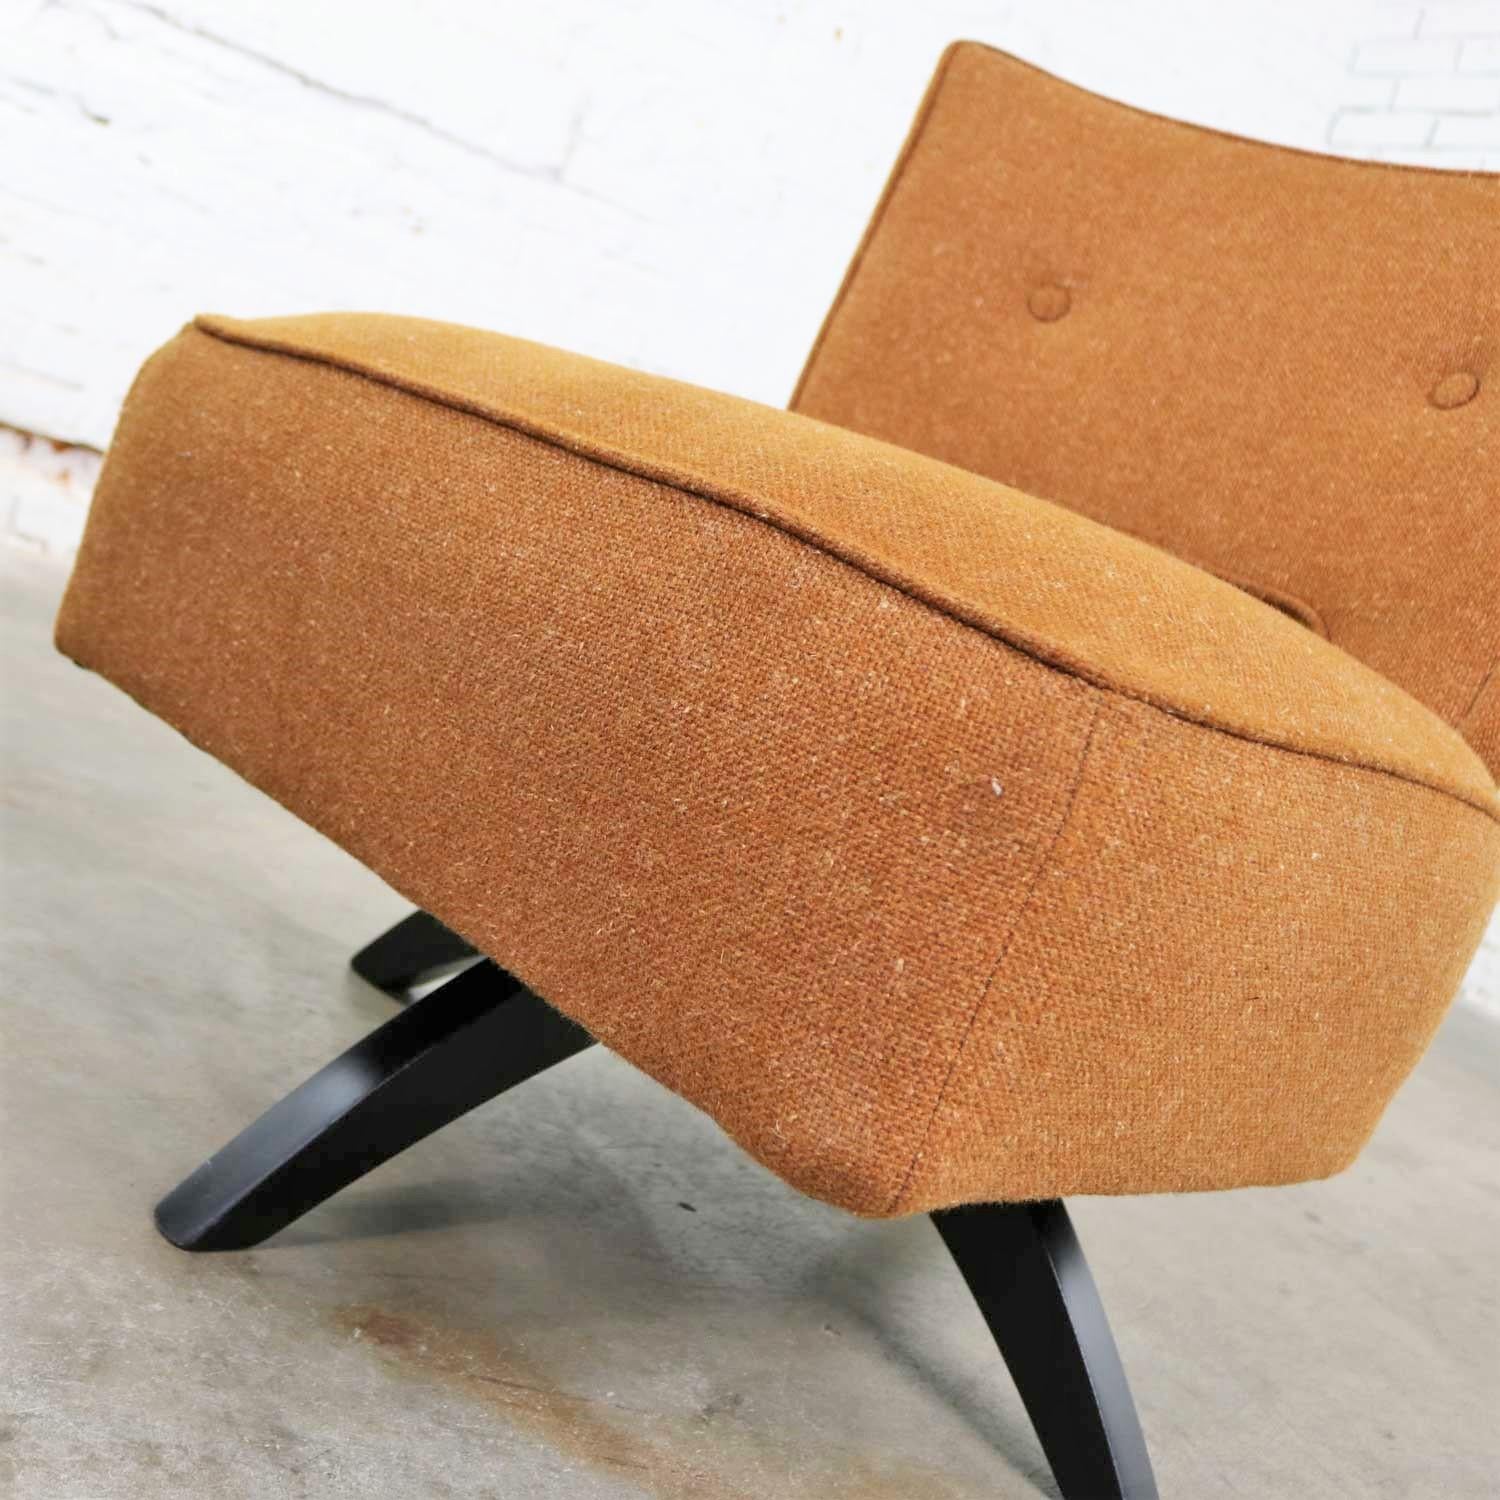 Wood Mid-Century Modern Swivel Slipper Chair Attributed to Kroehler Manufacturing